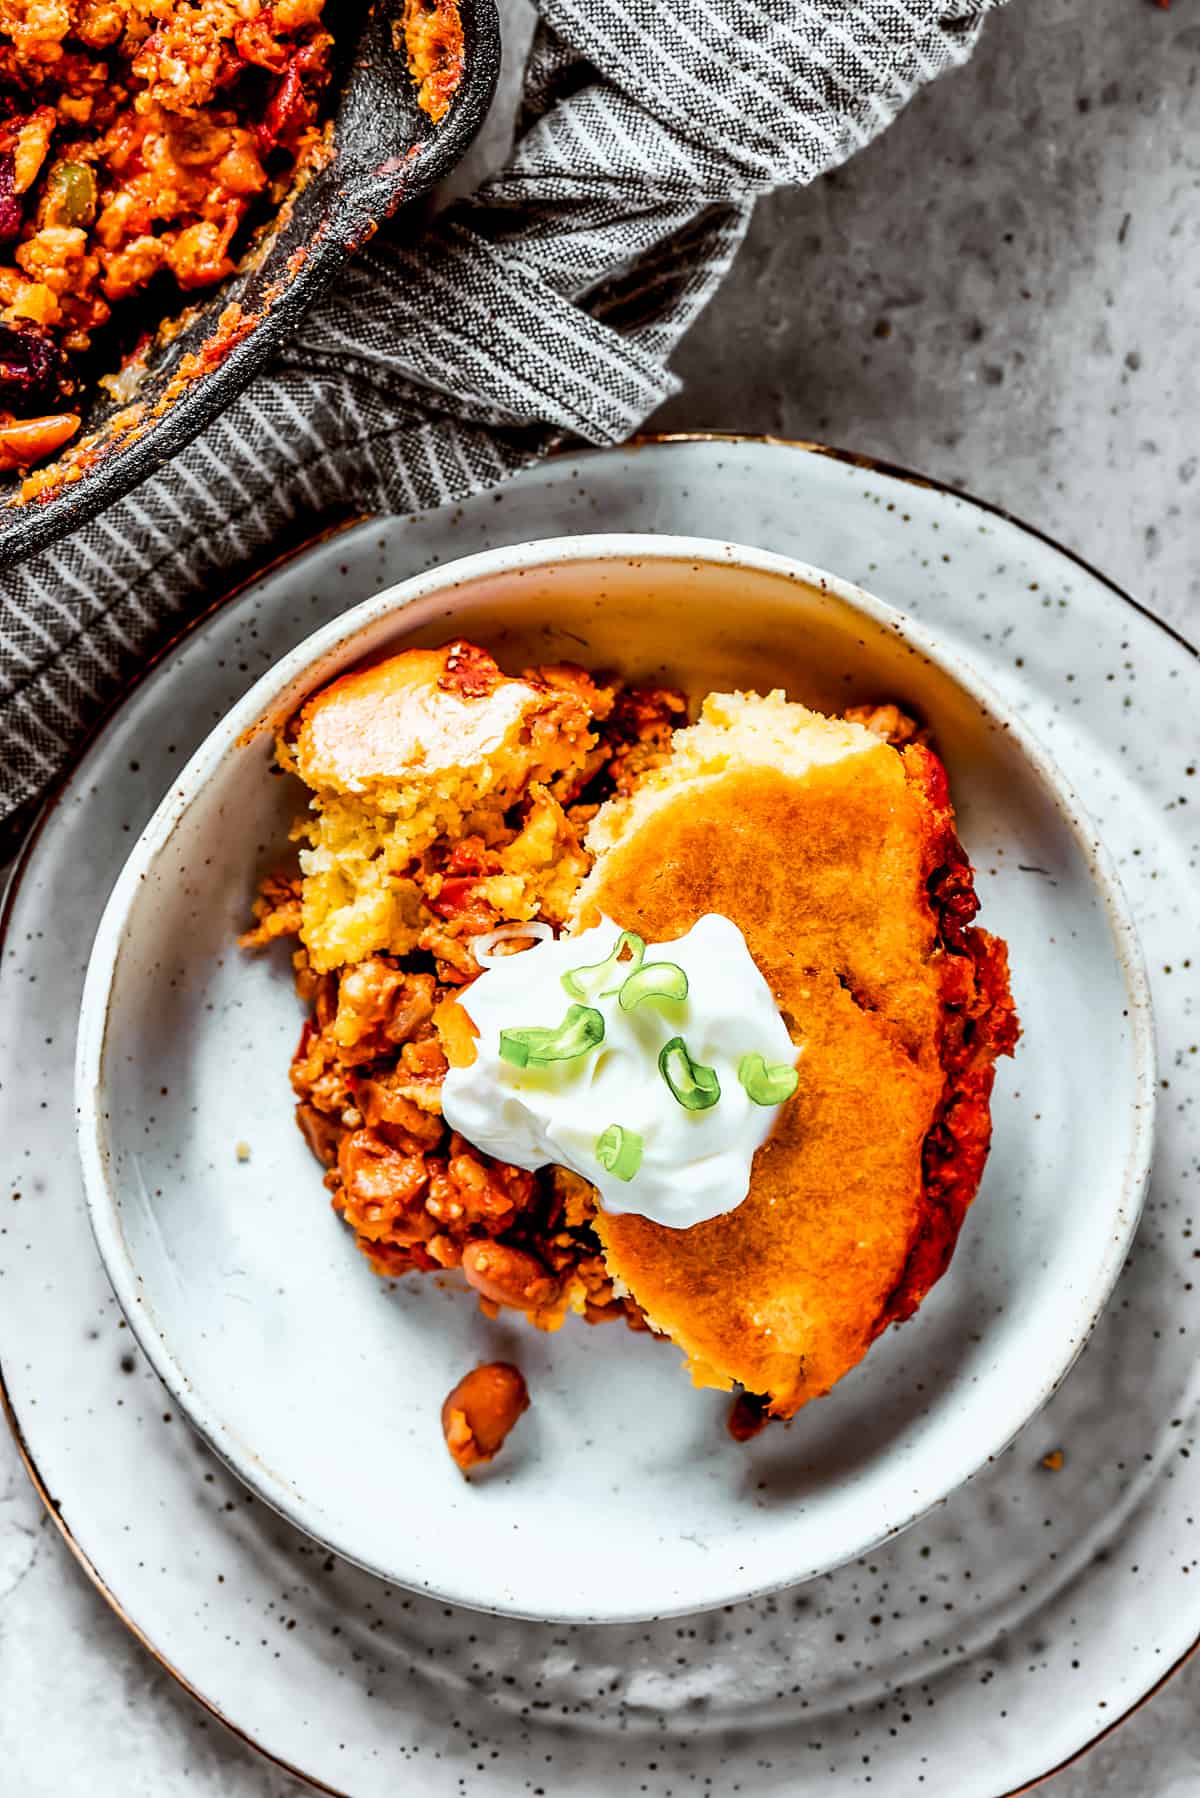 A serving of cornbread-topped turkey chili on an earthenware plate.